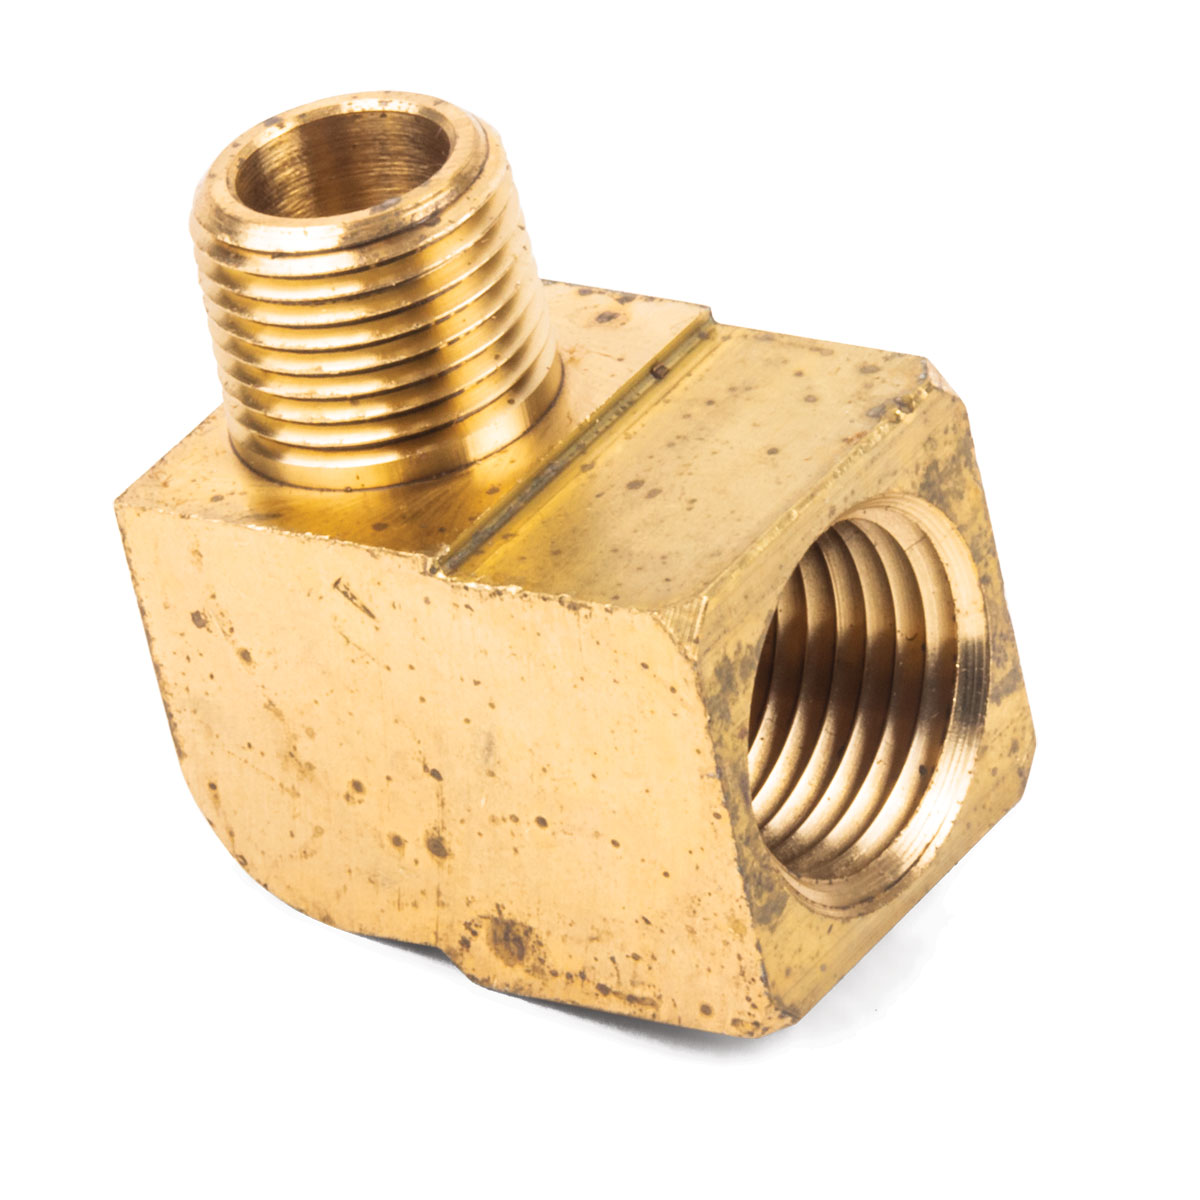 Brass Pipe Fitting, Street Elbow, 3/8 in. Female NPT x 3/8 in. Male NPT, Adapters, Pipe Fittings, Fittings, All Products